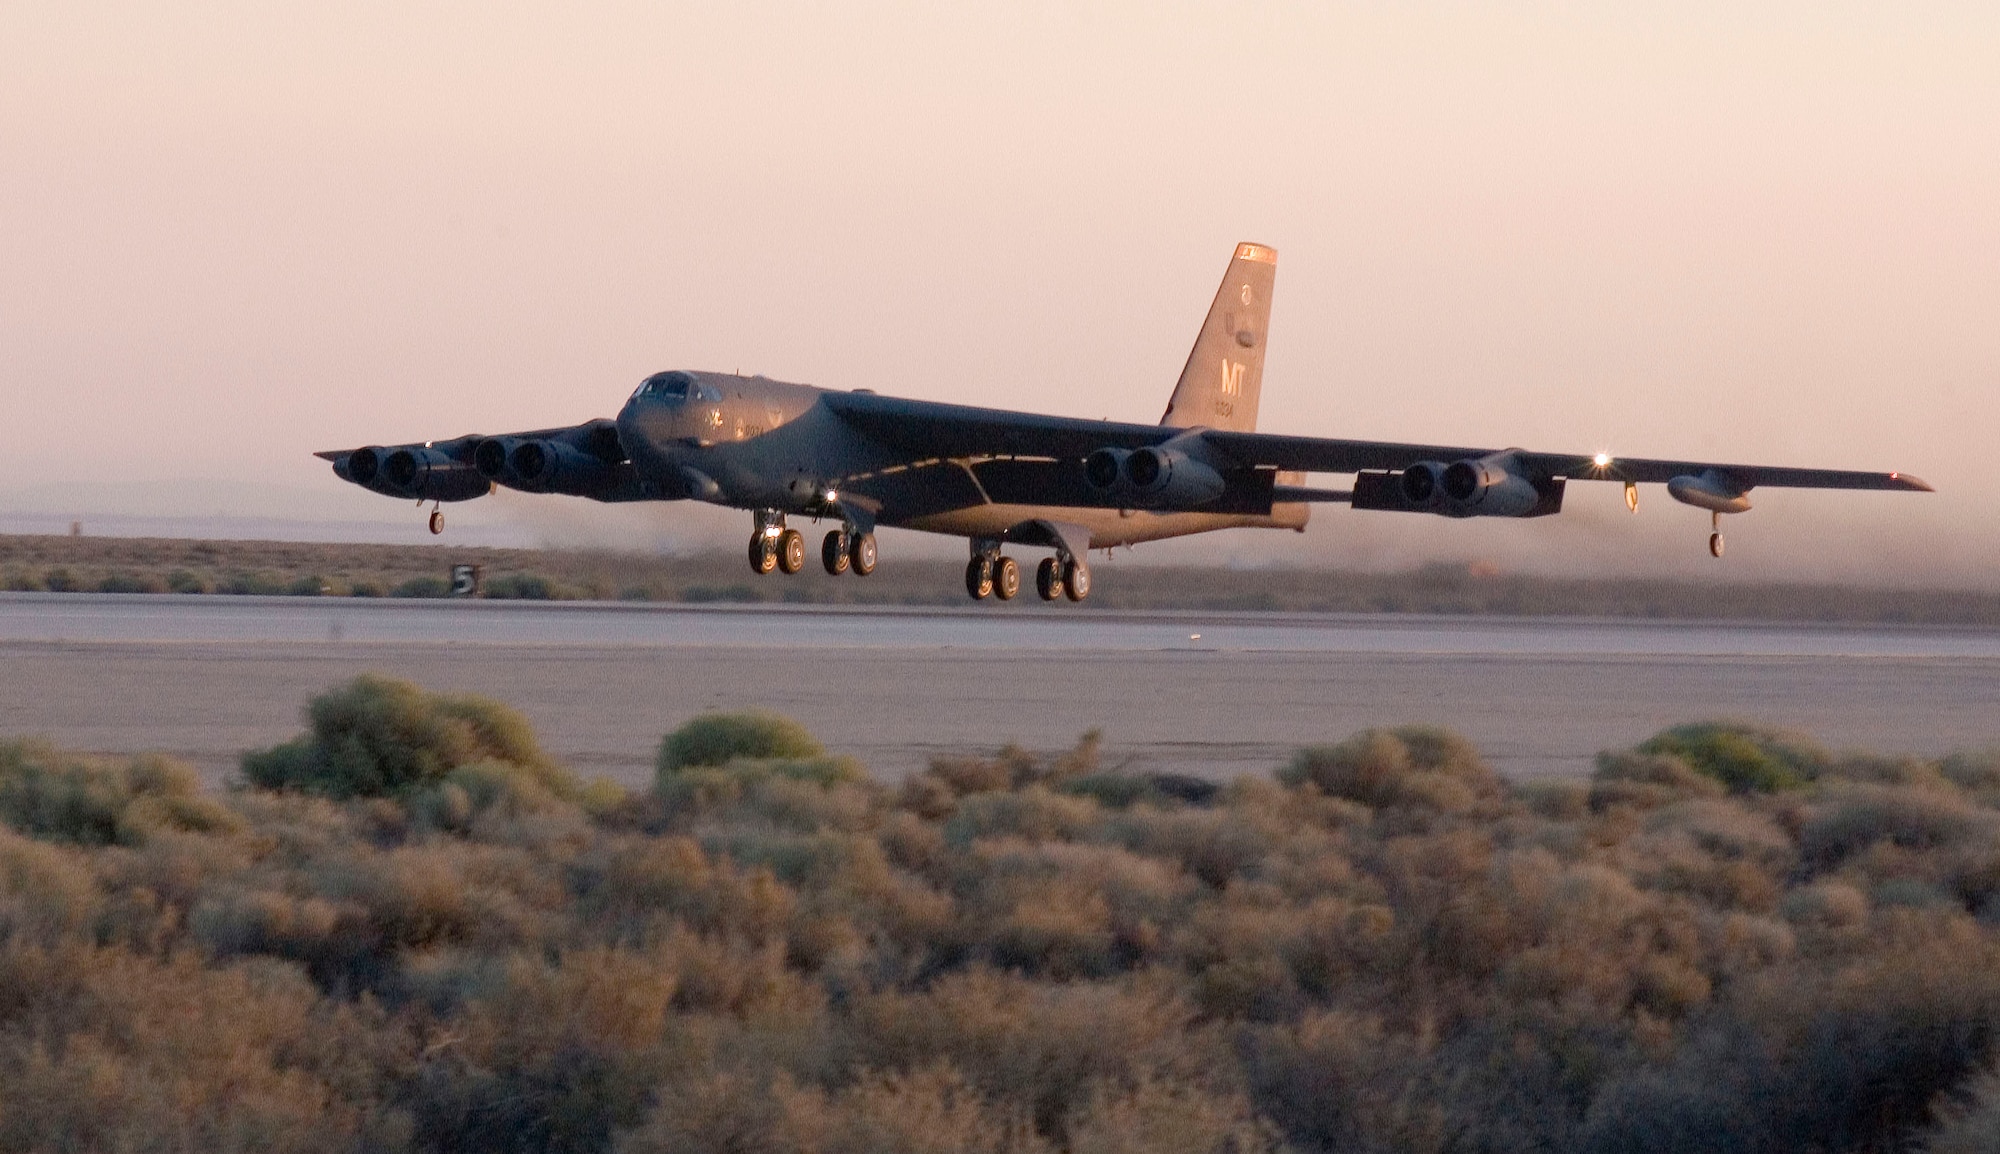 A B-52 Stratofortress takes off from Runway 22 during a Fischer-Tropsch test flight from Edwards Air Force Base, Calif., on Sept. 19. During the flight, two of the aircraft's eight engines ran on the natural gas-based Fischer-Tropsch fuel blend. The bombers are from the 5th Bomb Wing at Minot Air Force Base, N.D. (U.S. Air Force photo/Chad Bellay)